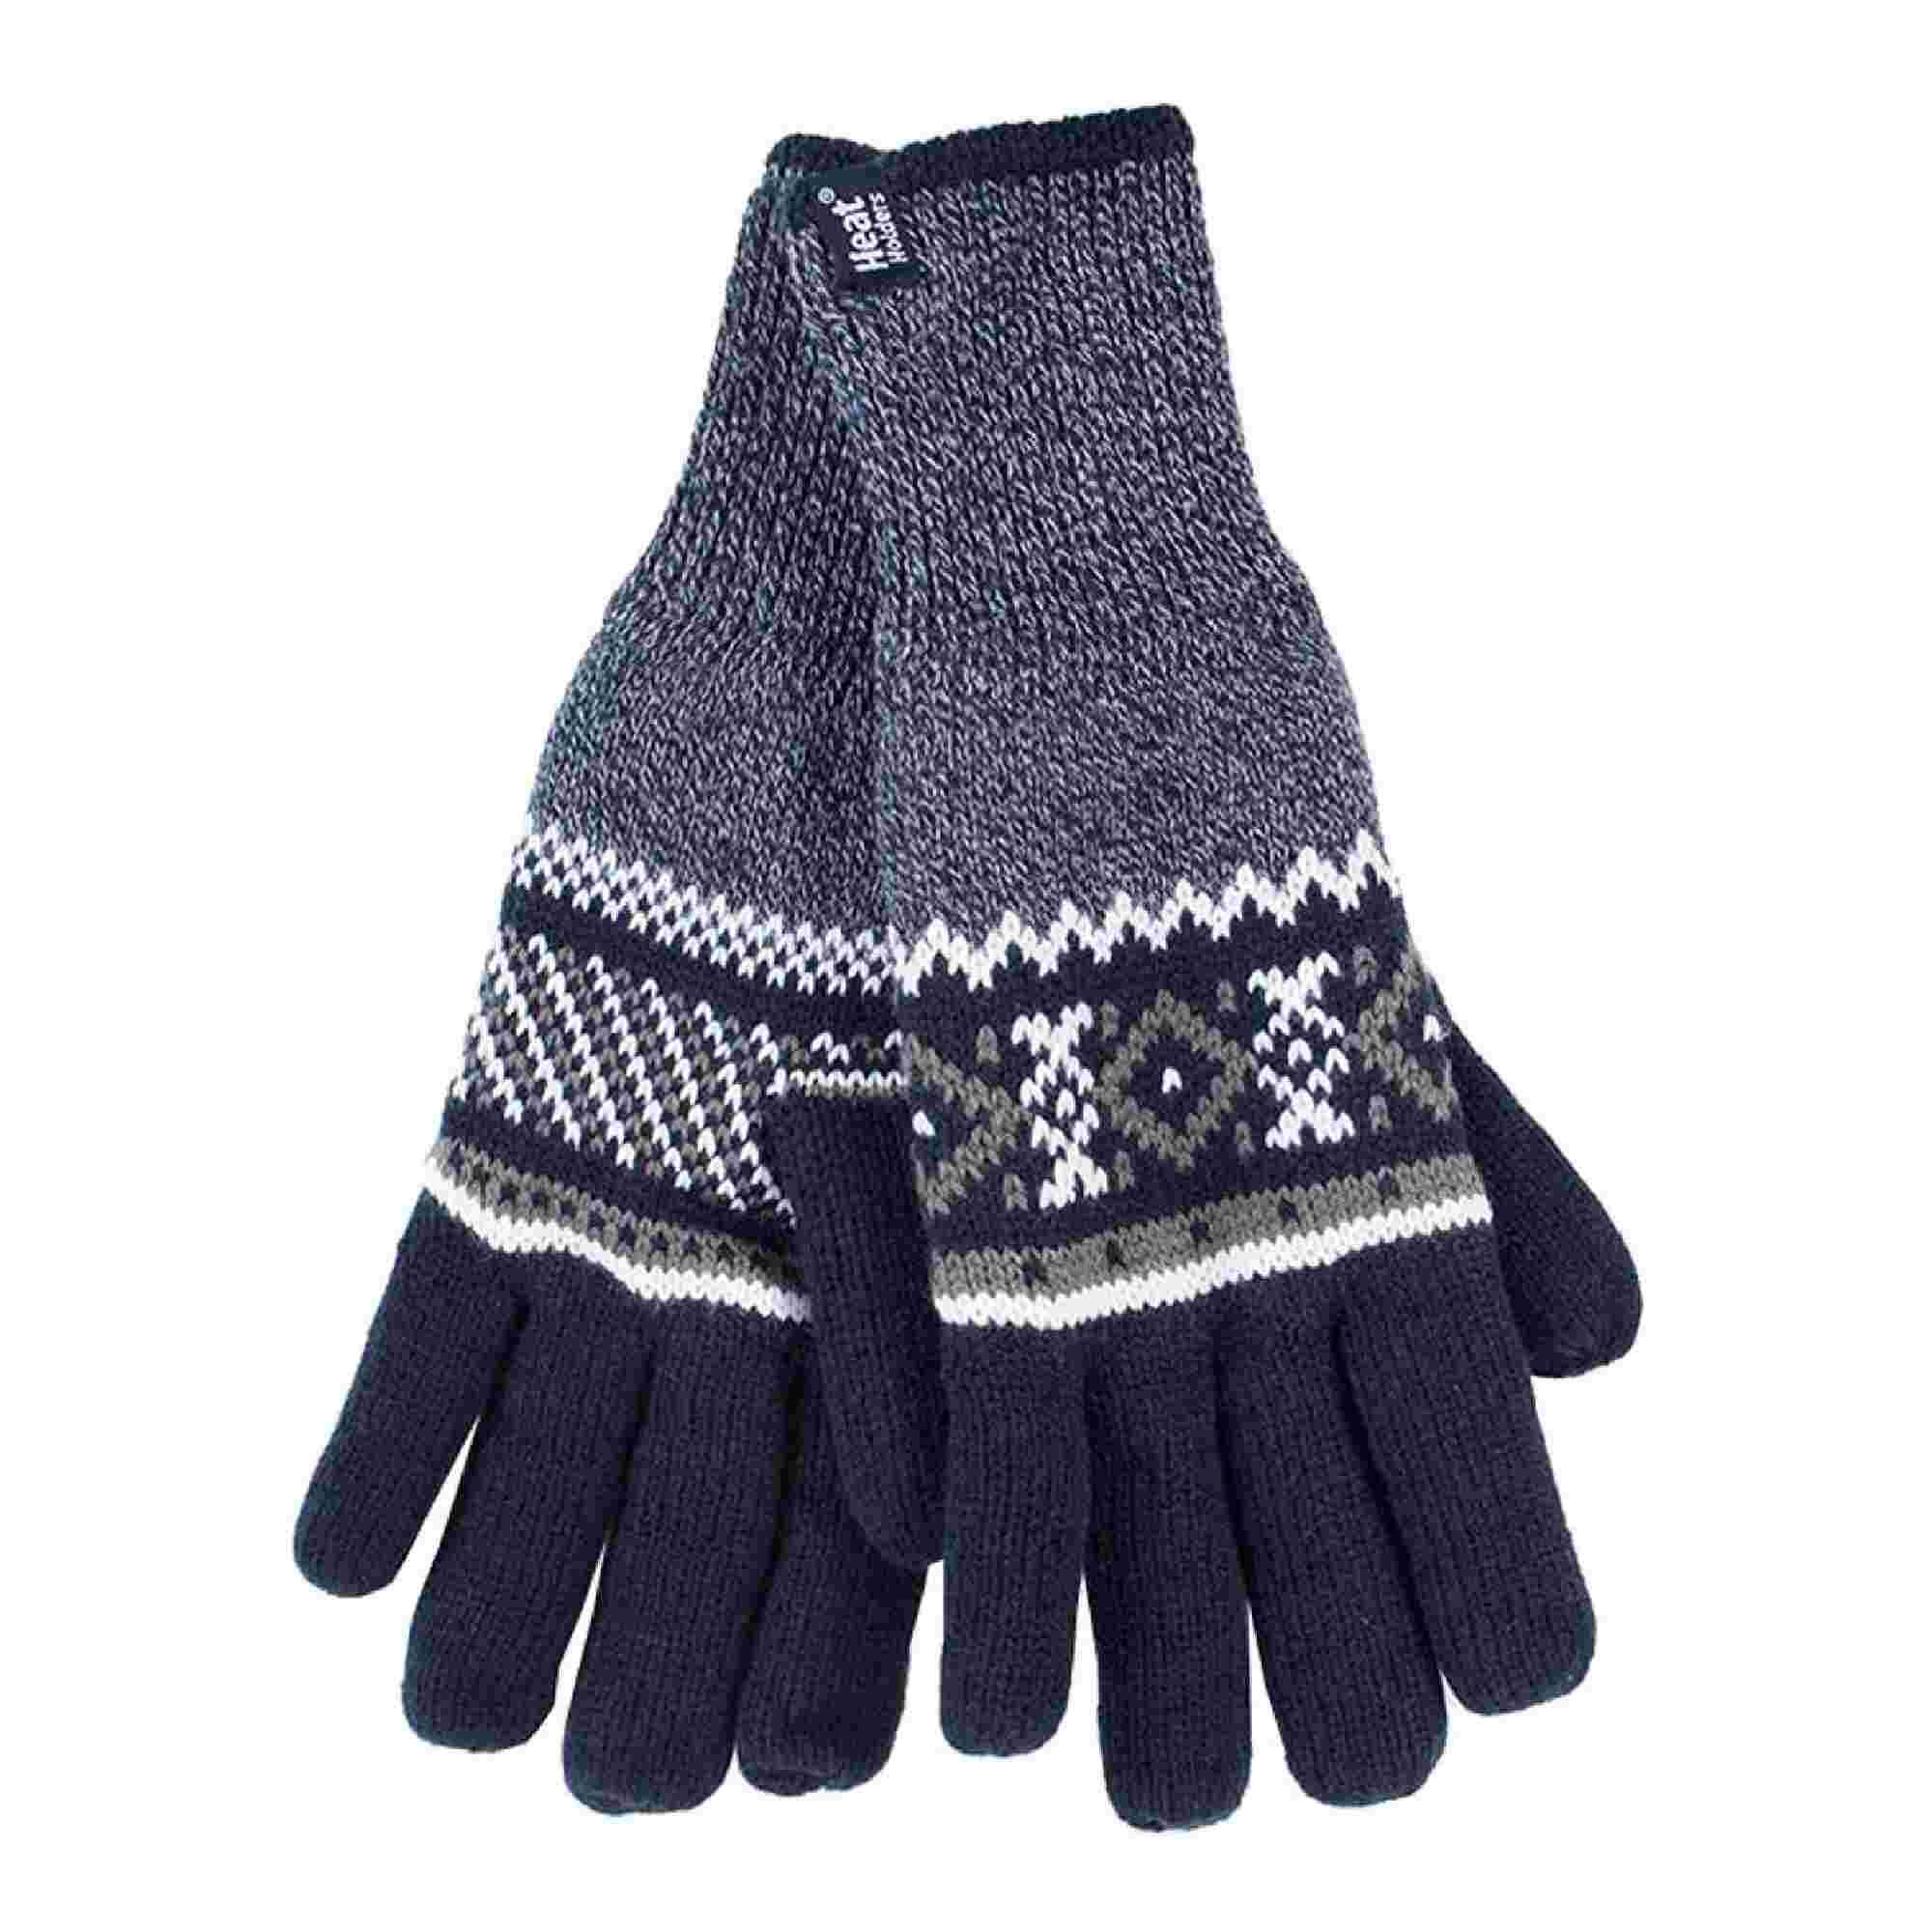 Mens Nordic Fairisle Knitted Fleece Lined Winter Thermal Gloves 1/4